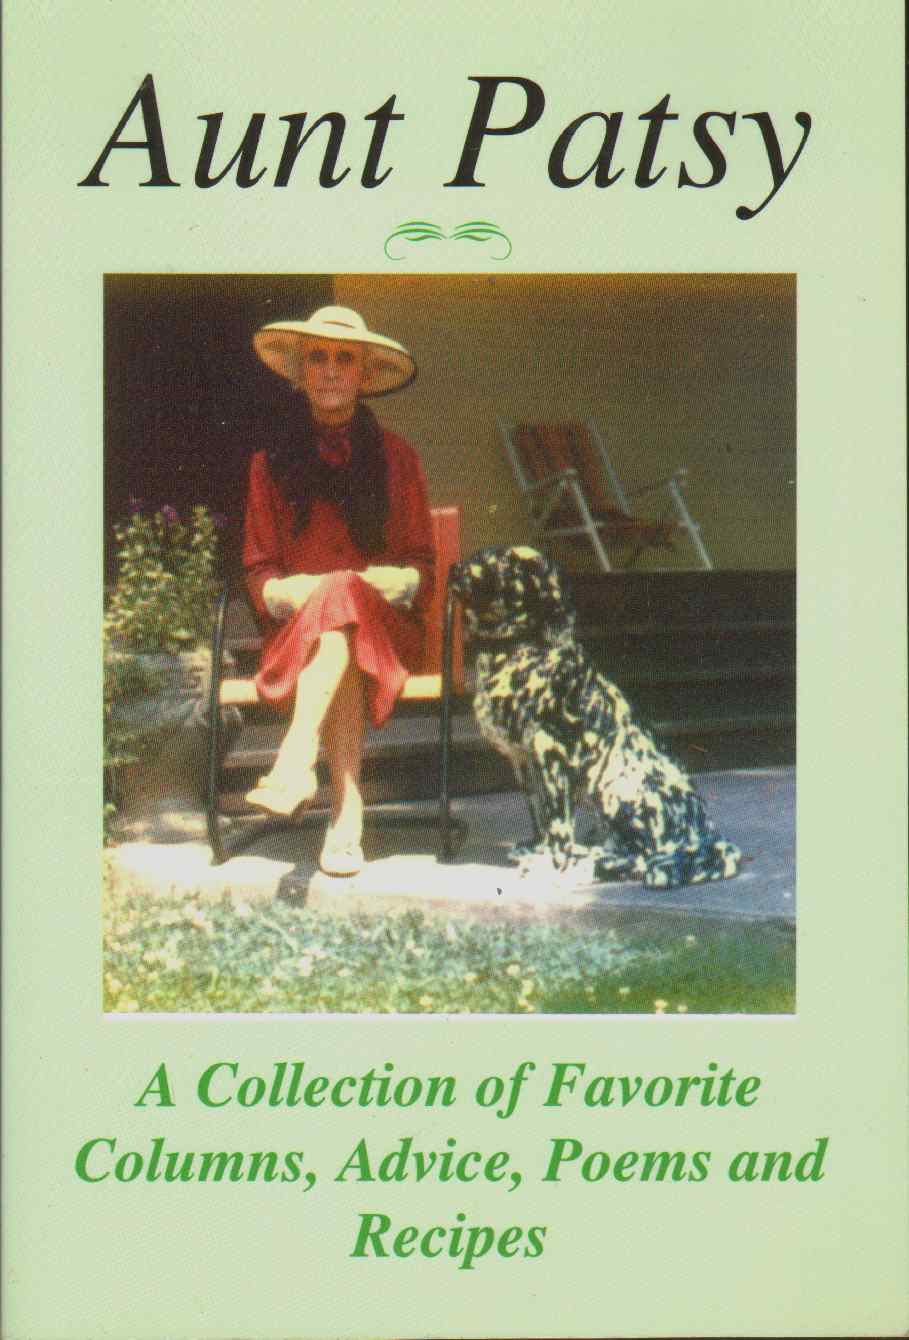 Image for AUNT PATSY A Collection of Favorite Columns, Advice, Poems and Recipes